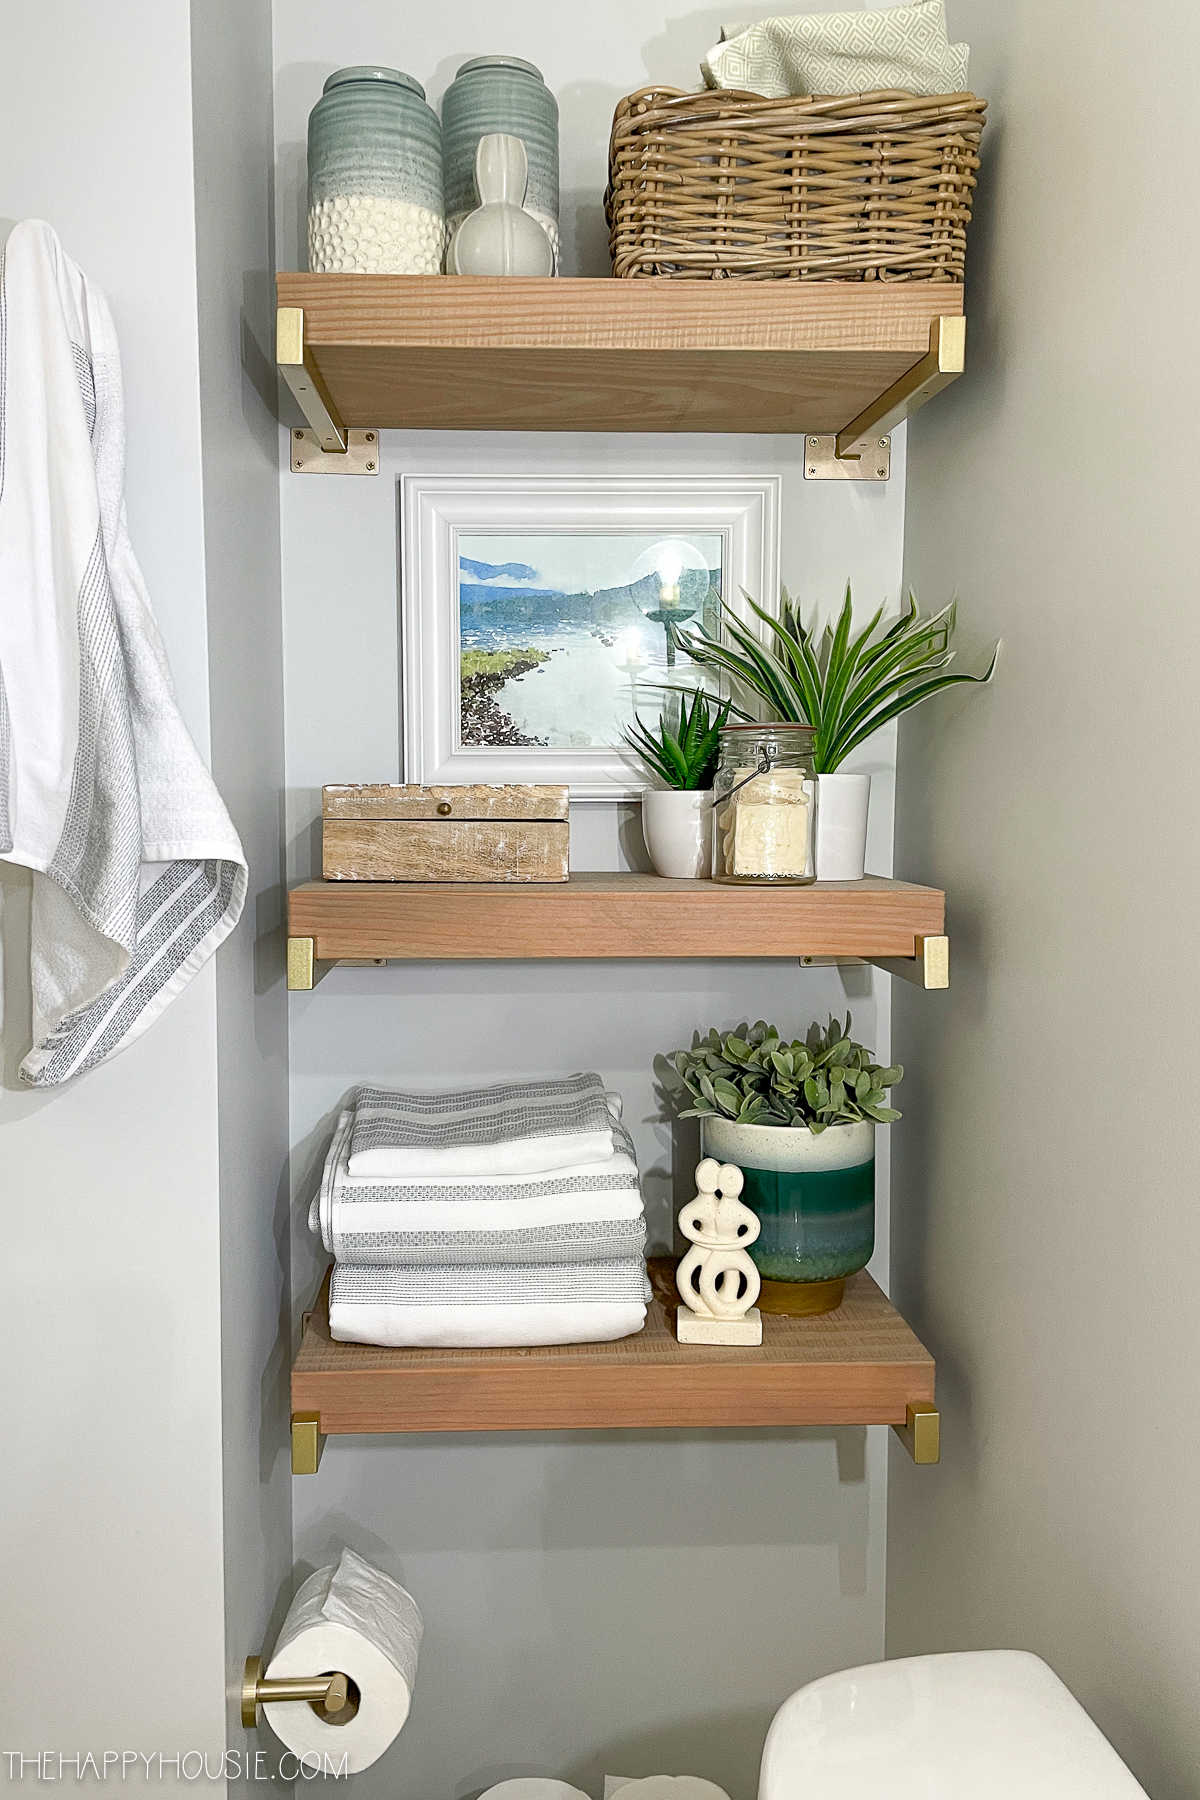 wood shelves in recessed alcove of bathroom